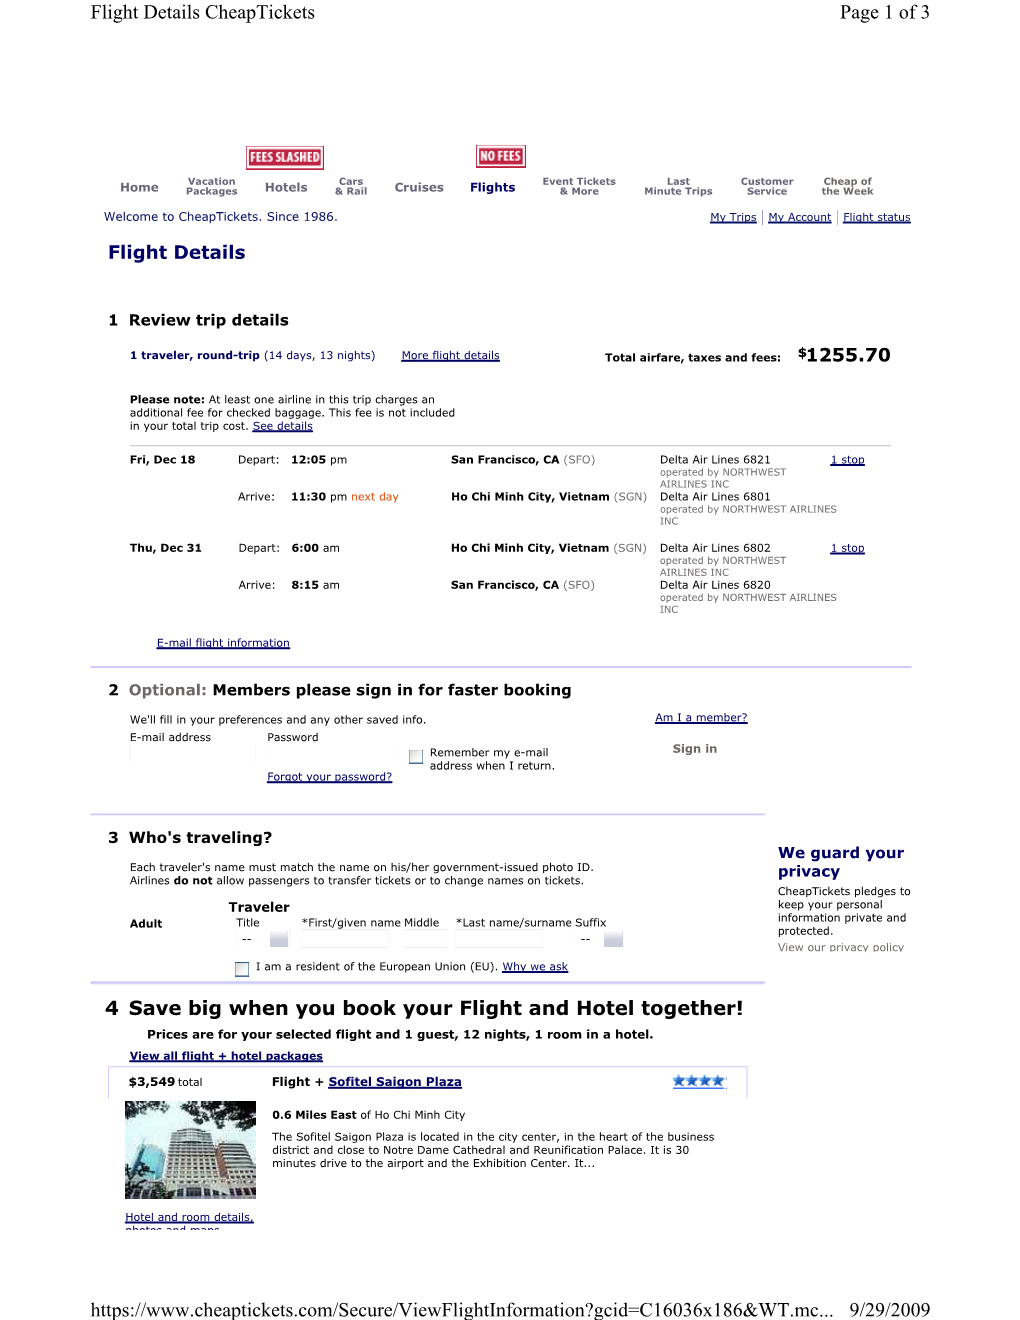 Page 1 of 3 Flight Details Cheaptickets 9/29/2009 Https